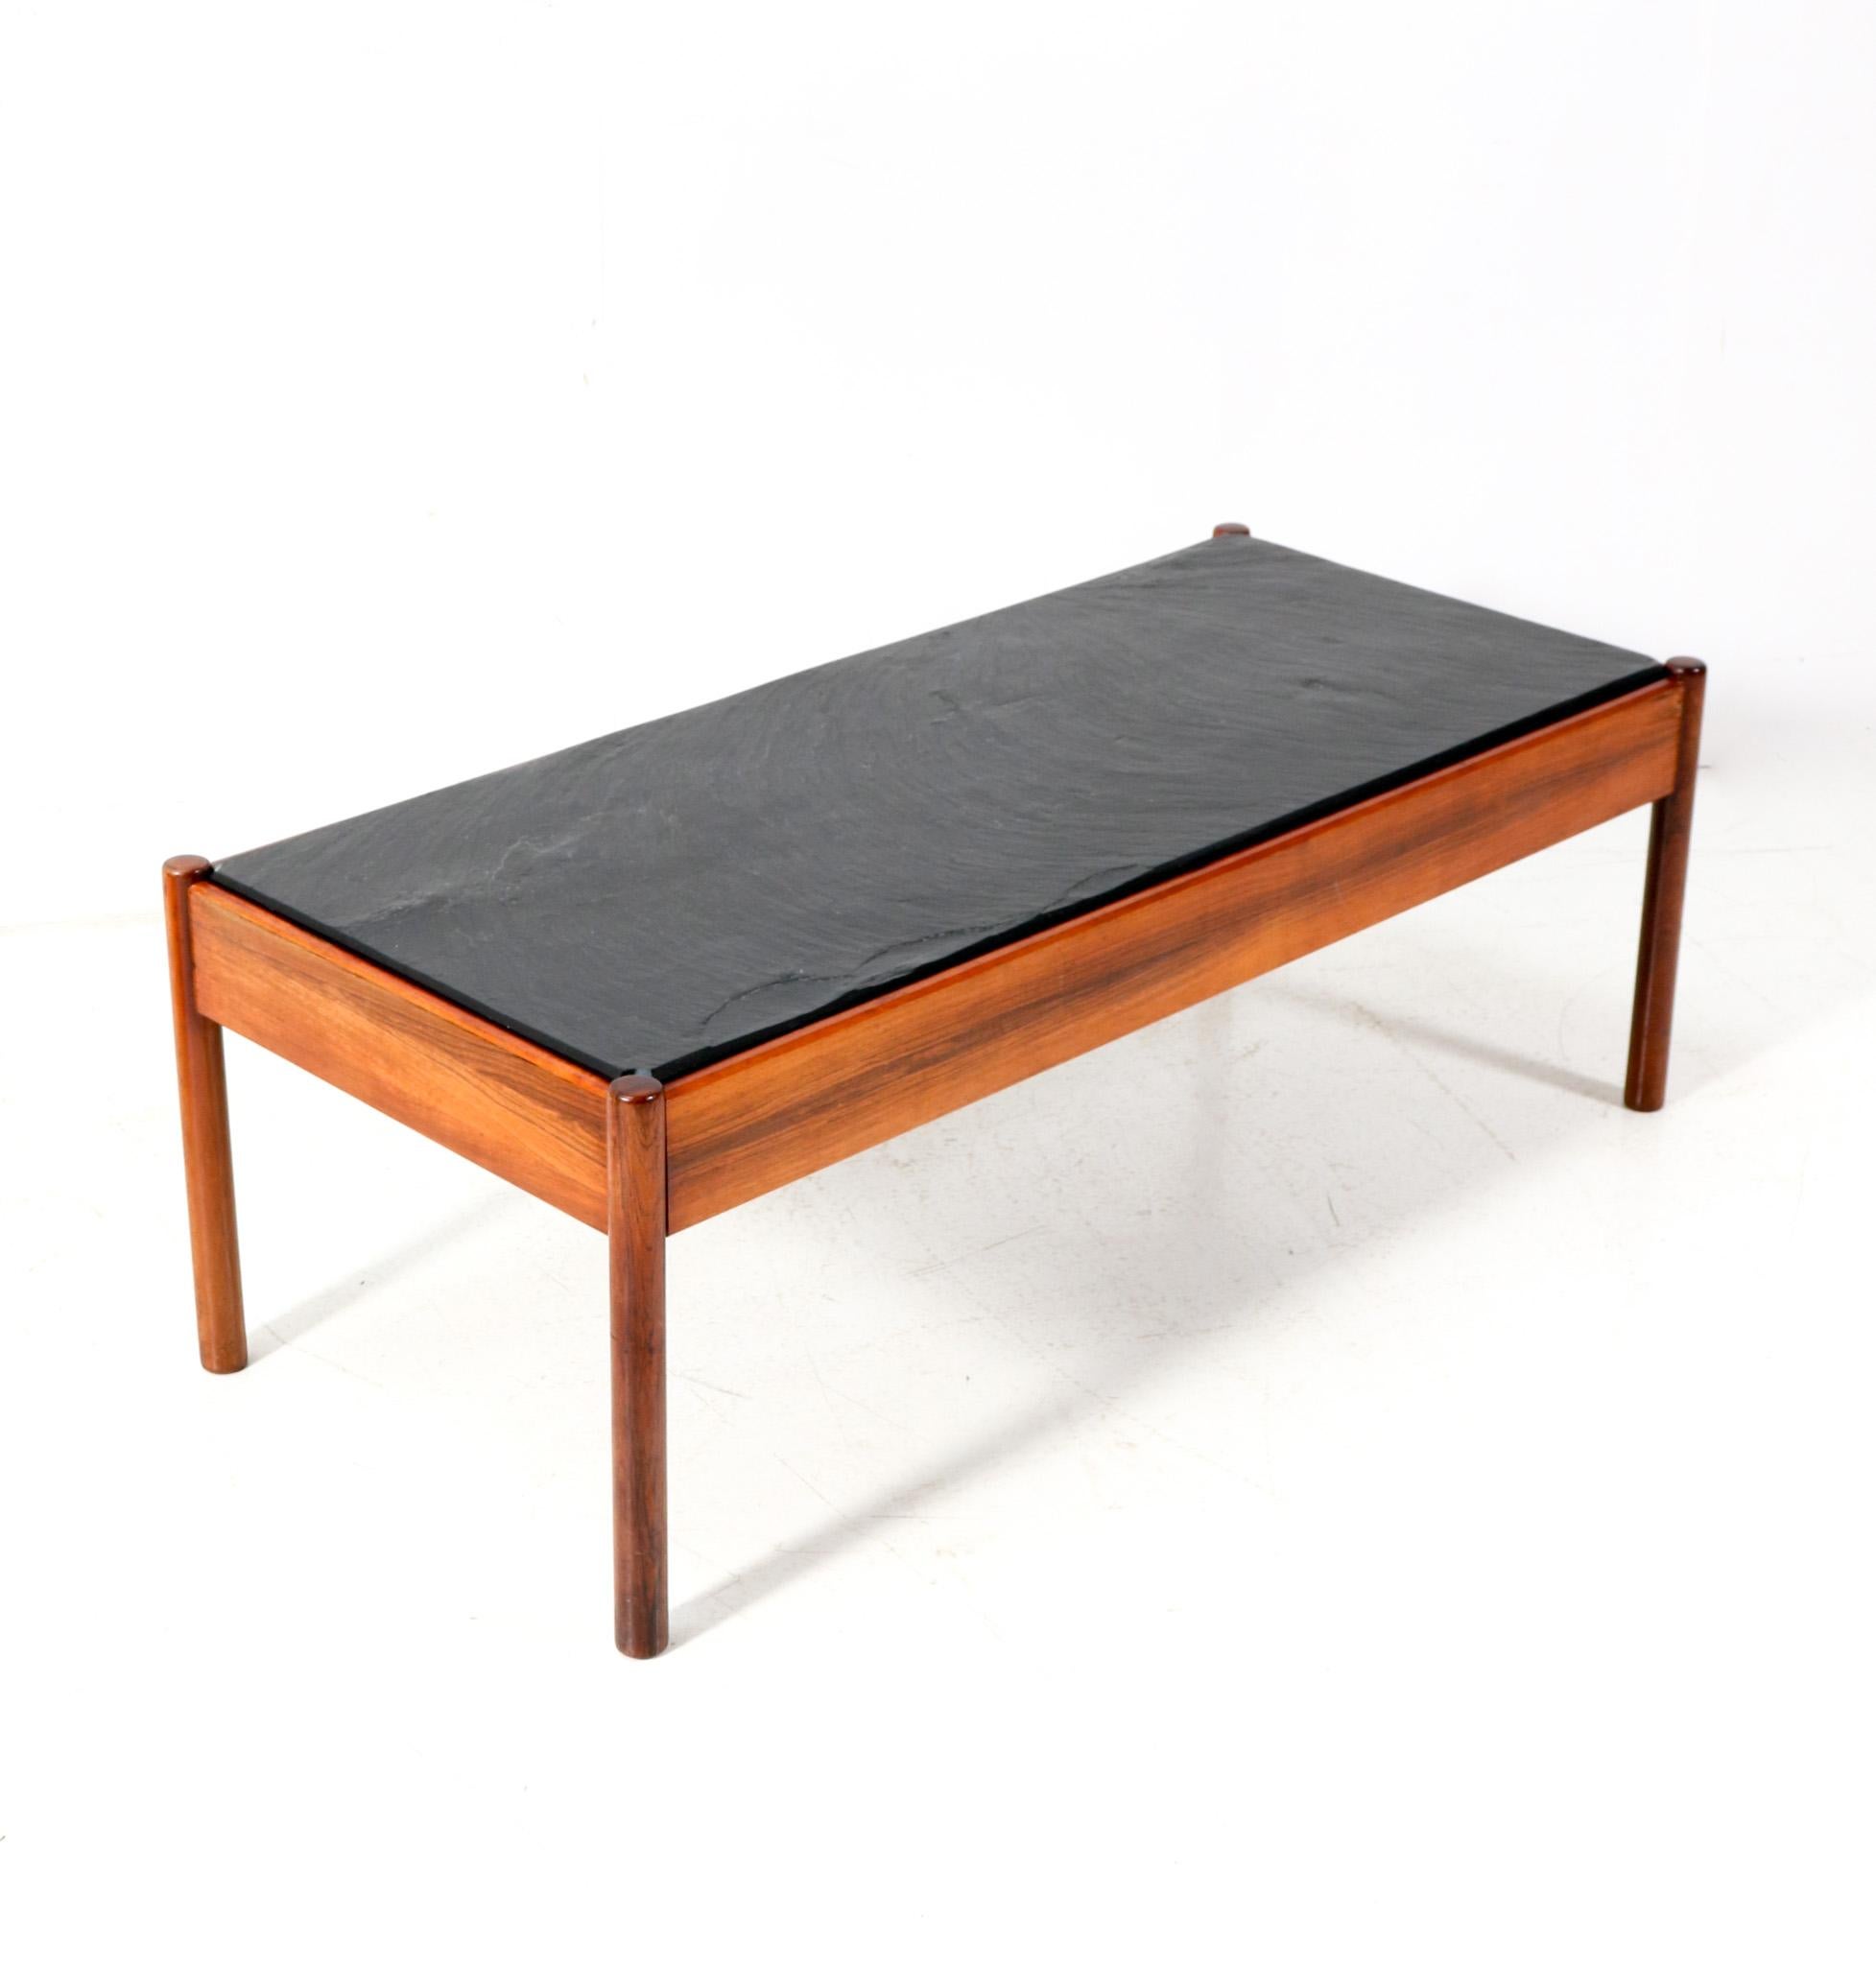 Stunning and elegant Mid-Century Modern coffee table or cocktail table.
Striking Dutch design from the 1960s.
Solid teak frame with original slate top.
This wonderful Mid-Century Modern coffee table or cocktail table is in very good original